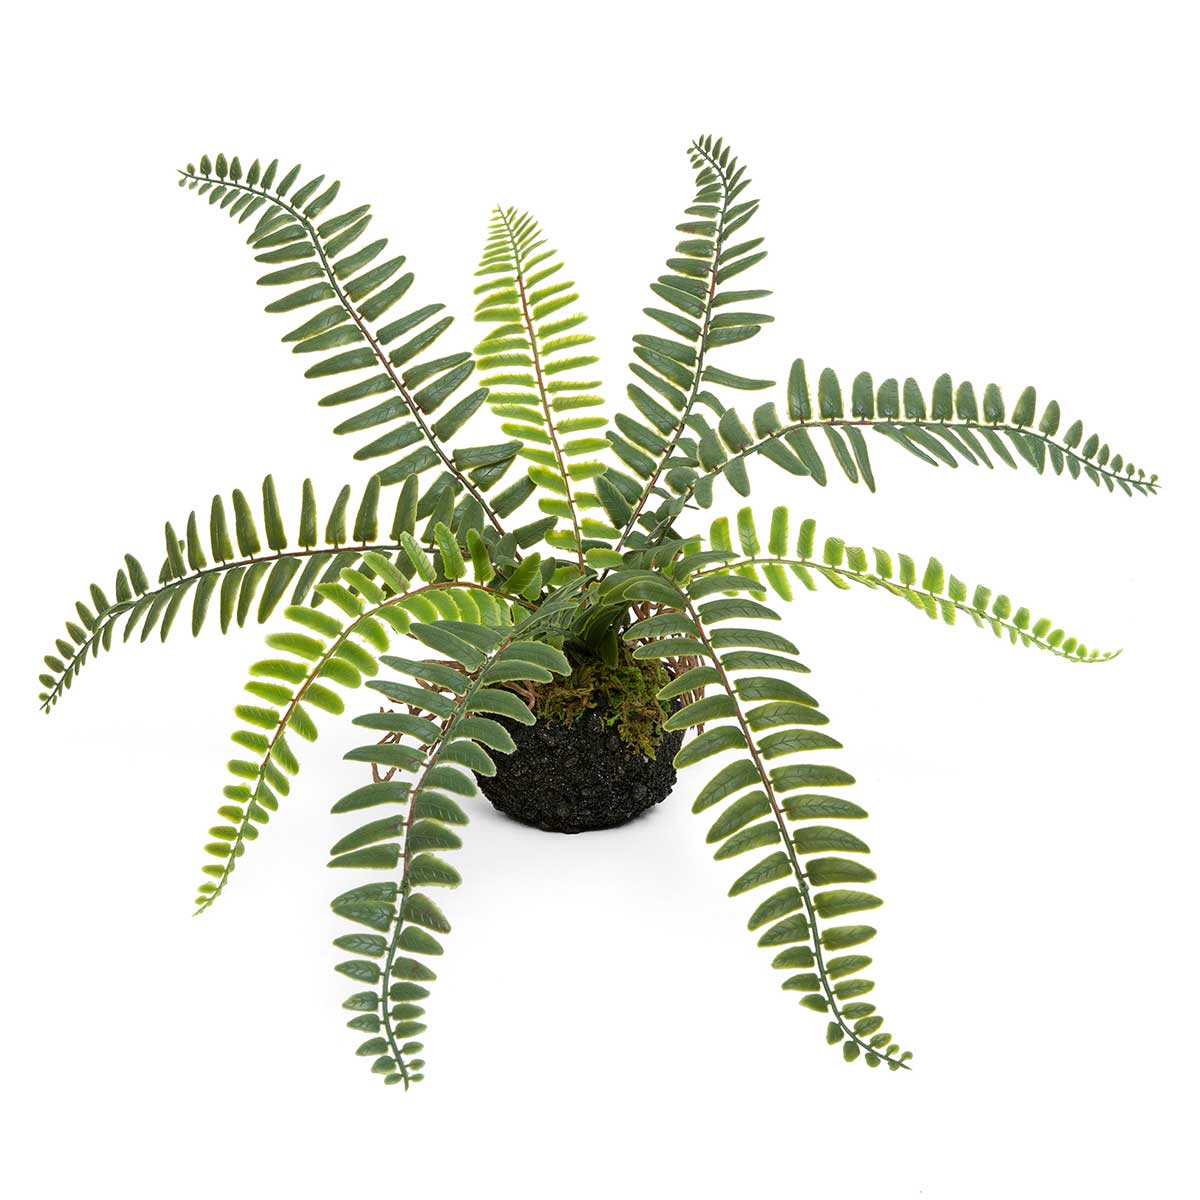 BOSTON FERN WITH FAUX DIRT, MOSS AND ROOTS 17"X11"